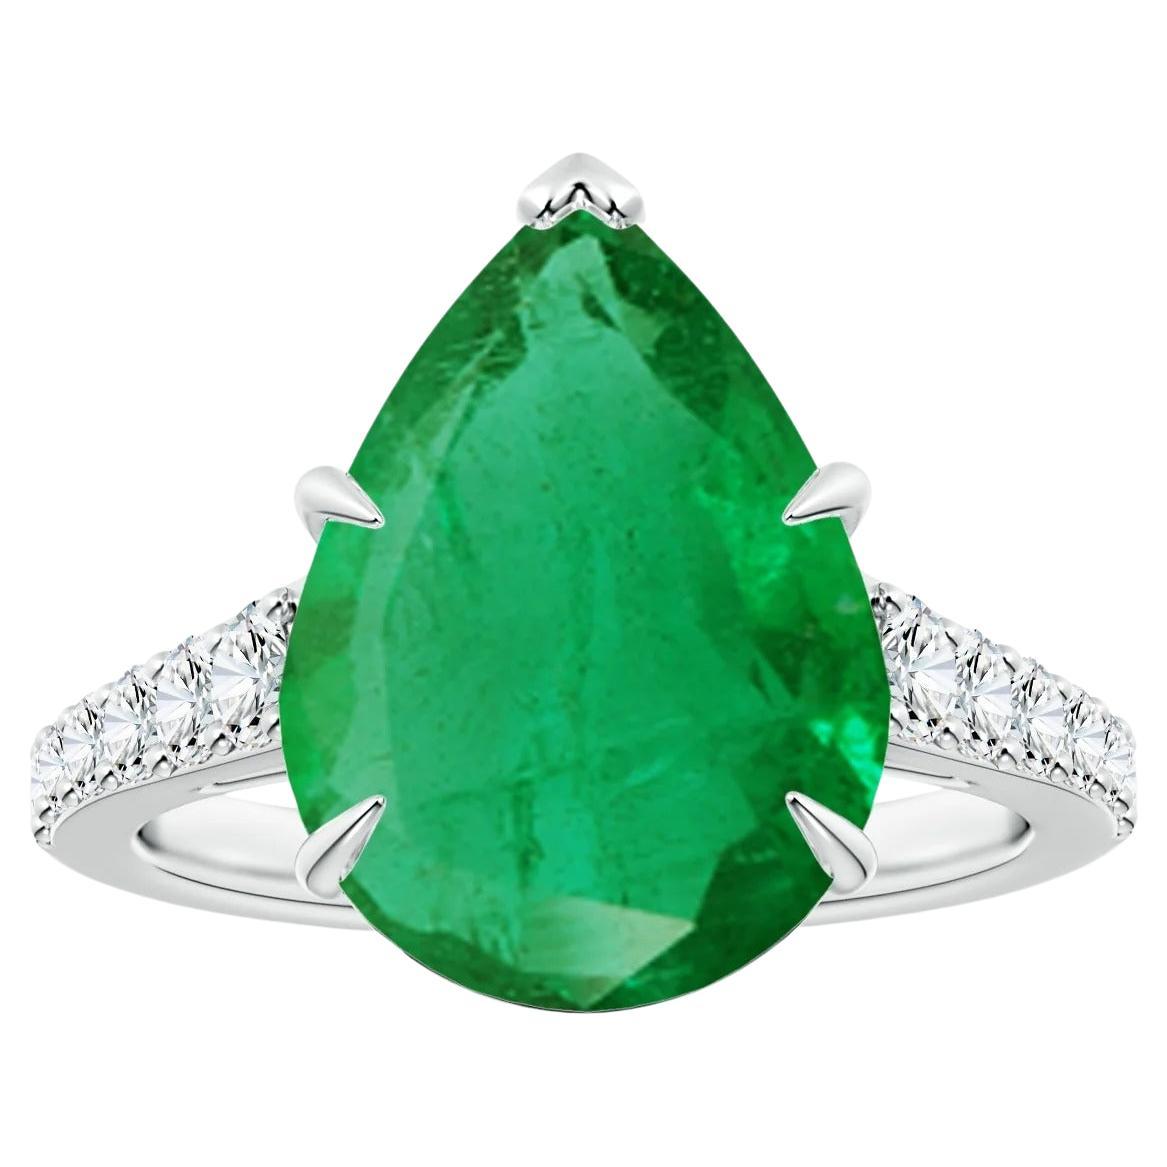 Angara Gia Certified Pear-Shaped Emerald Ring in White Gold with Diamonds